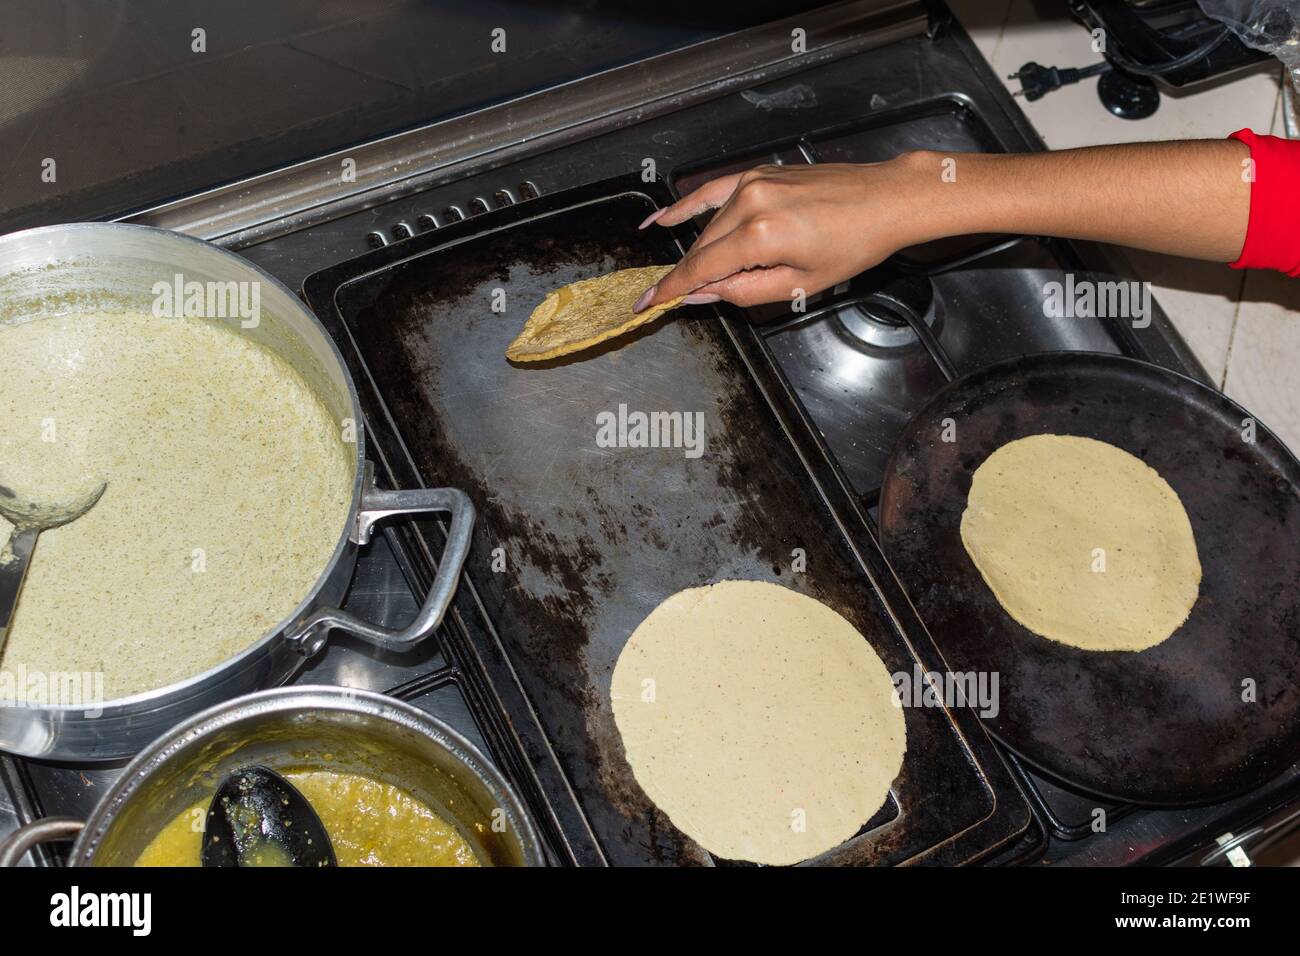 https://c8.alamy.com/comp/2E1WF9F/hand-of-a-young-woman-taking-out-a-tortilla-from-the-comal-in-her-kitchen-house-2E1WF9F.jpg